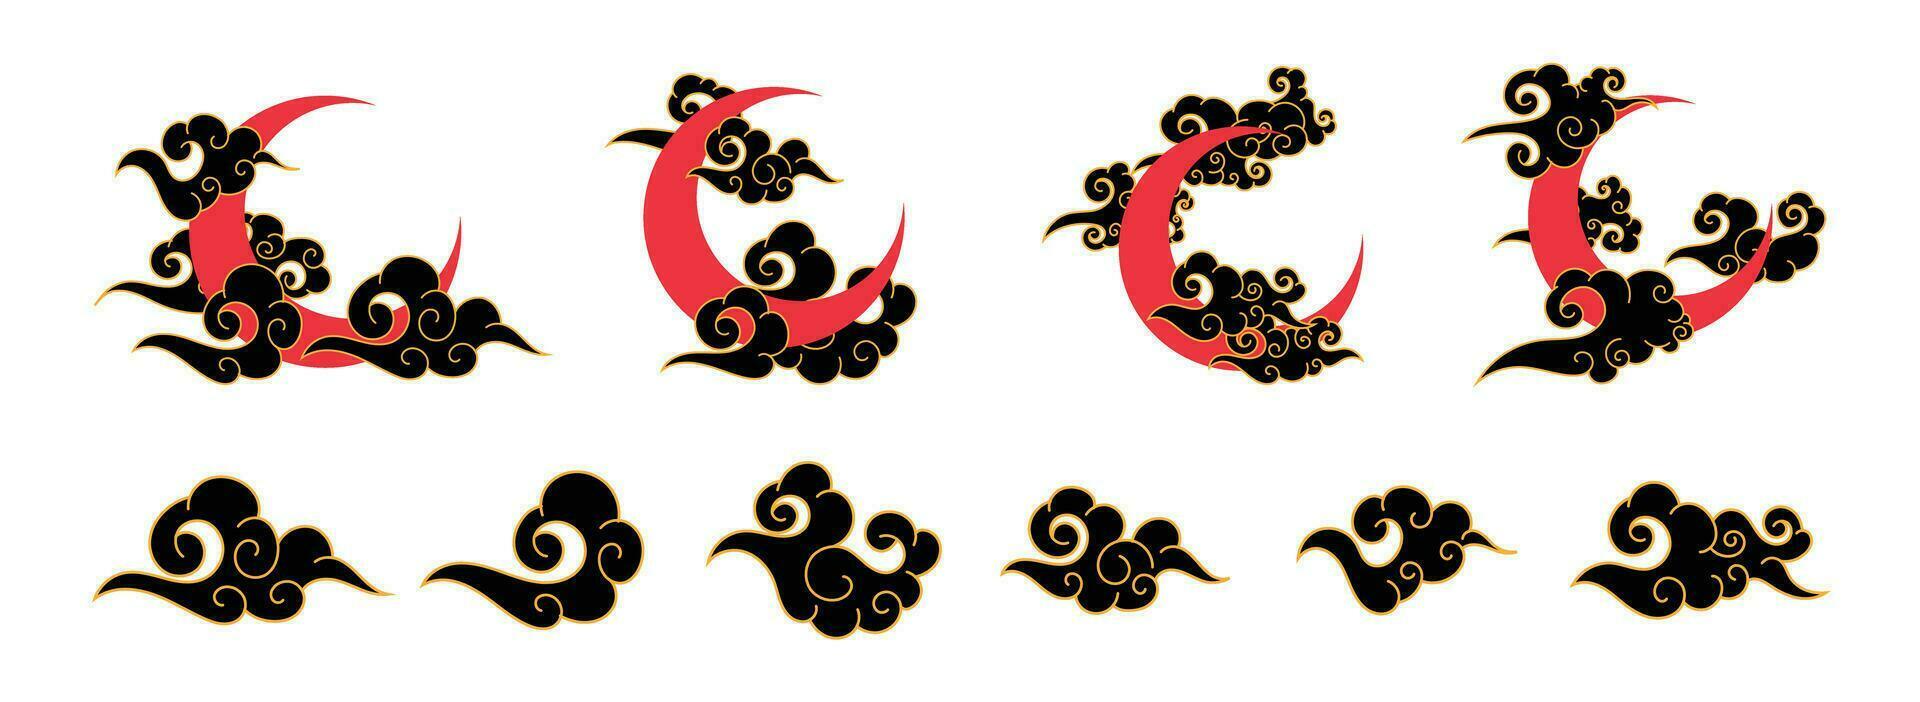 asian ornamental traditional cloud with red crescent moon vector